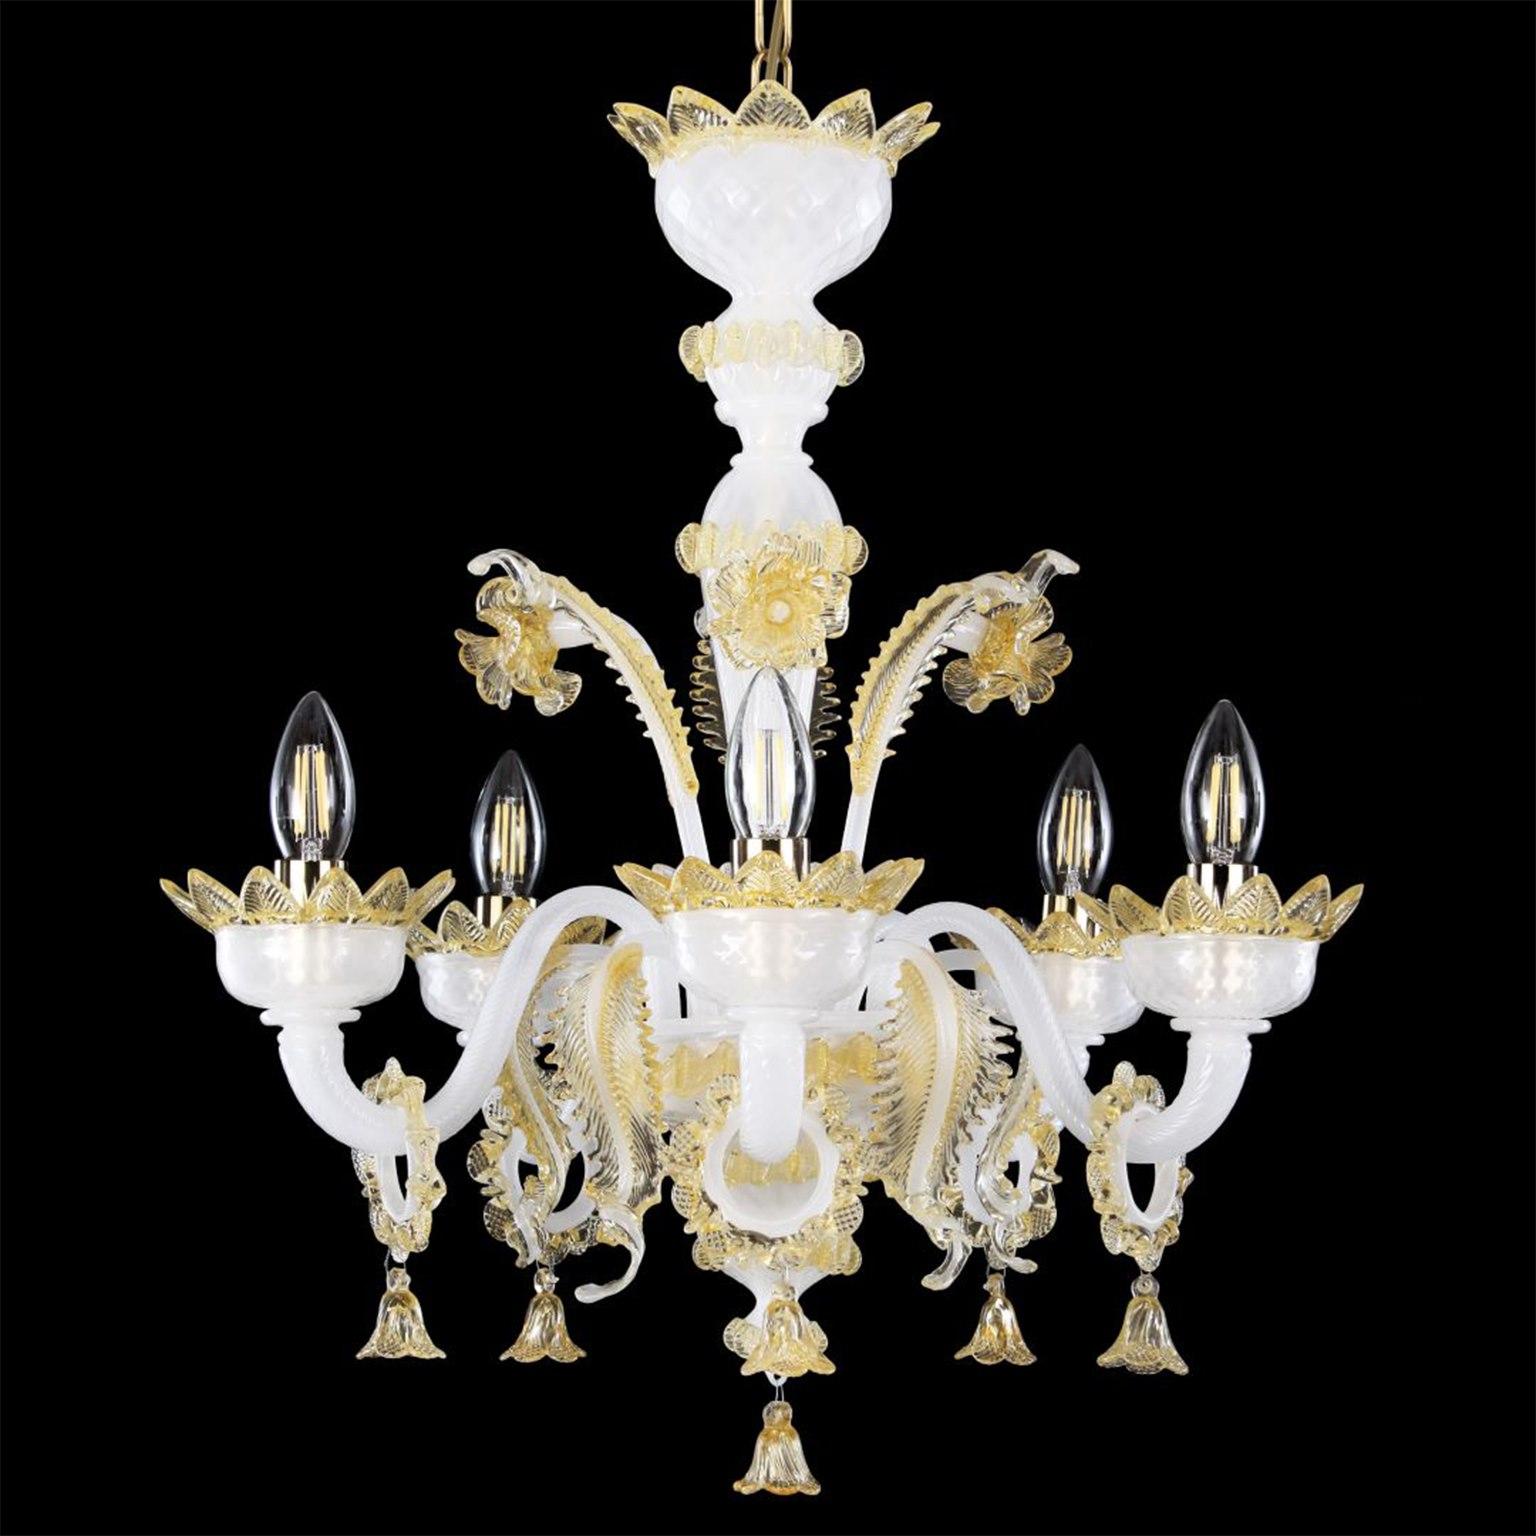 Classic Chandelier 5 Arms white silk Murano Glass details amber by Multiforme.
The classic Murano glass chandelier, as it is in the collective imagination. As many other chandeliers in our collections, V-Classic 800 is designed with attention to